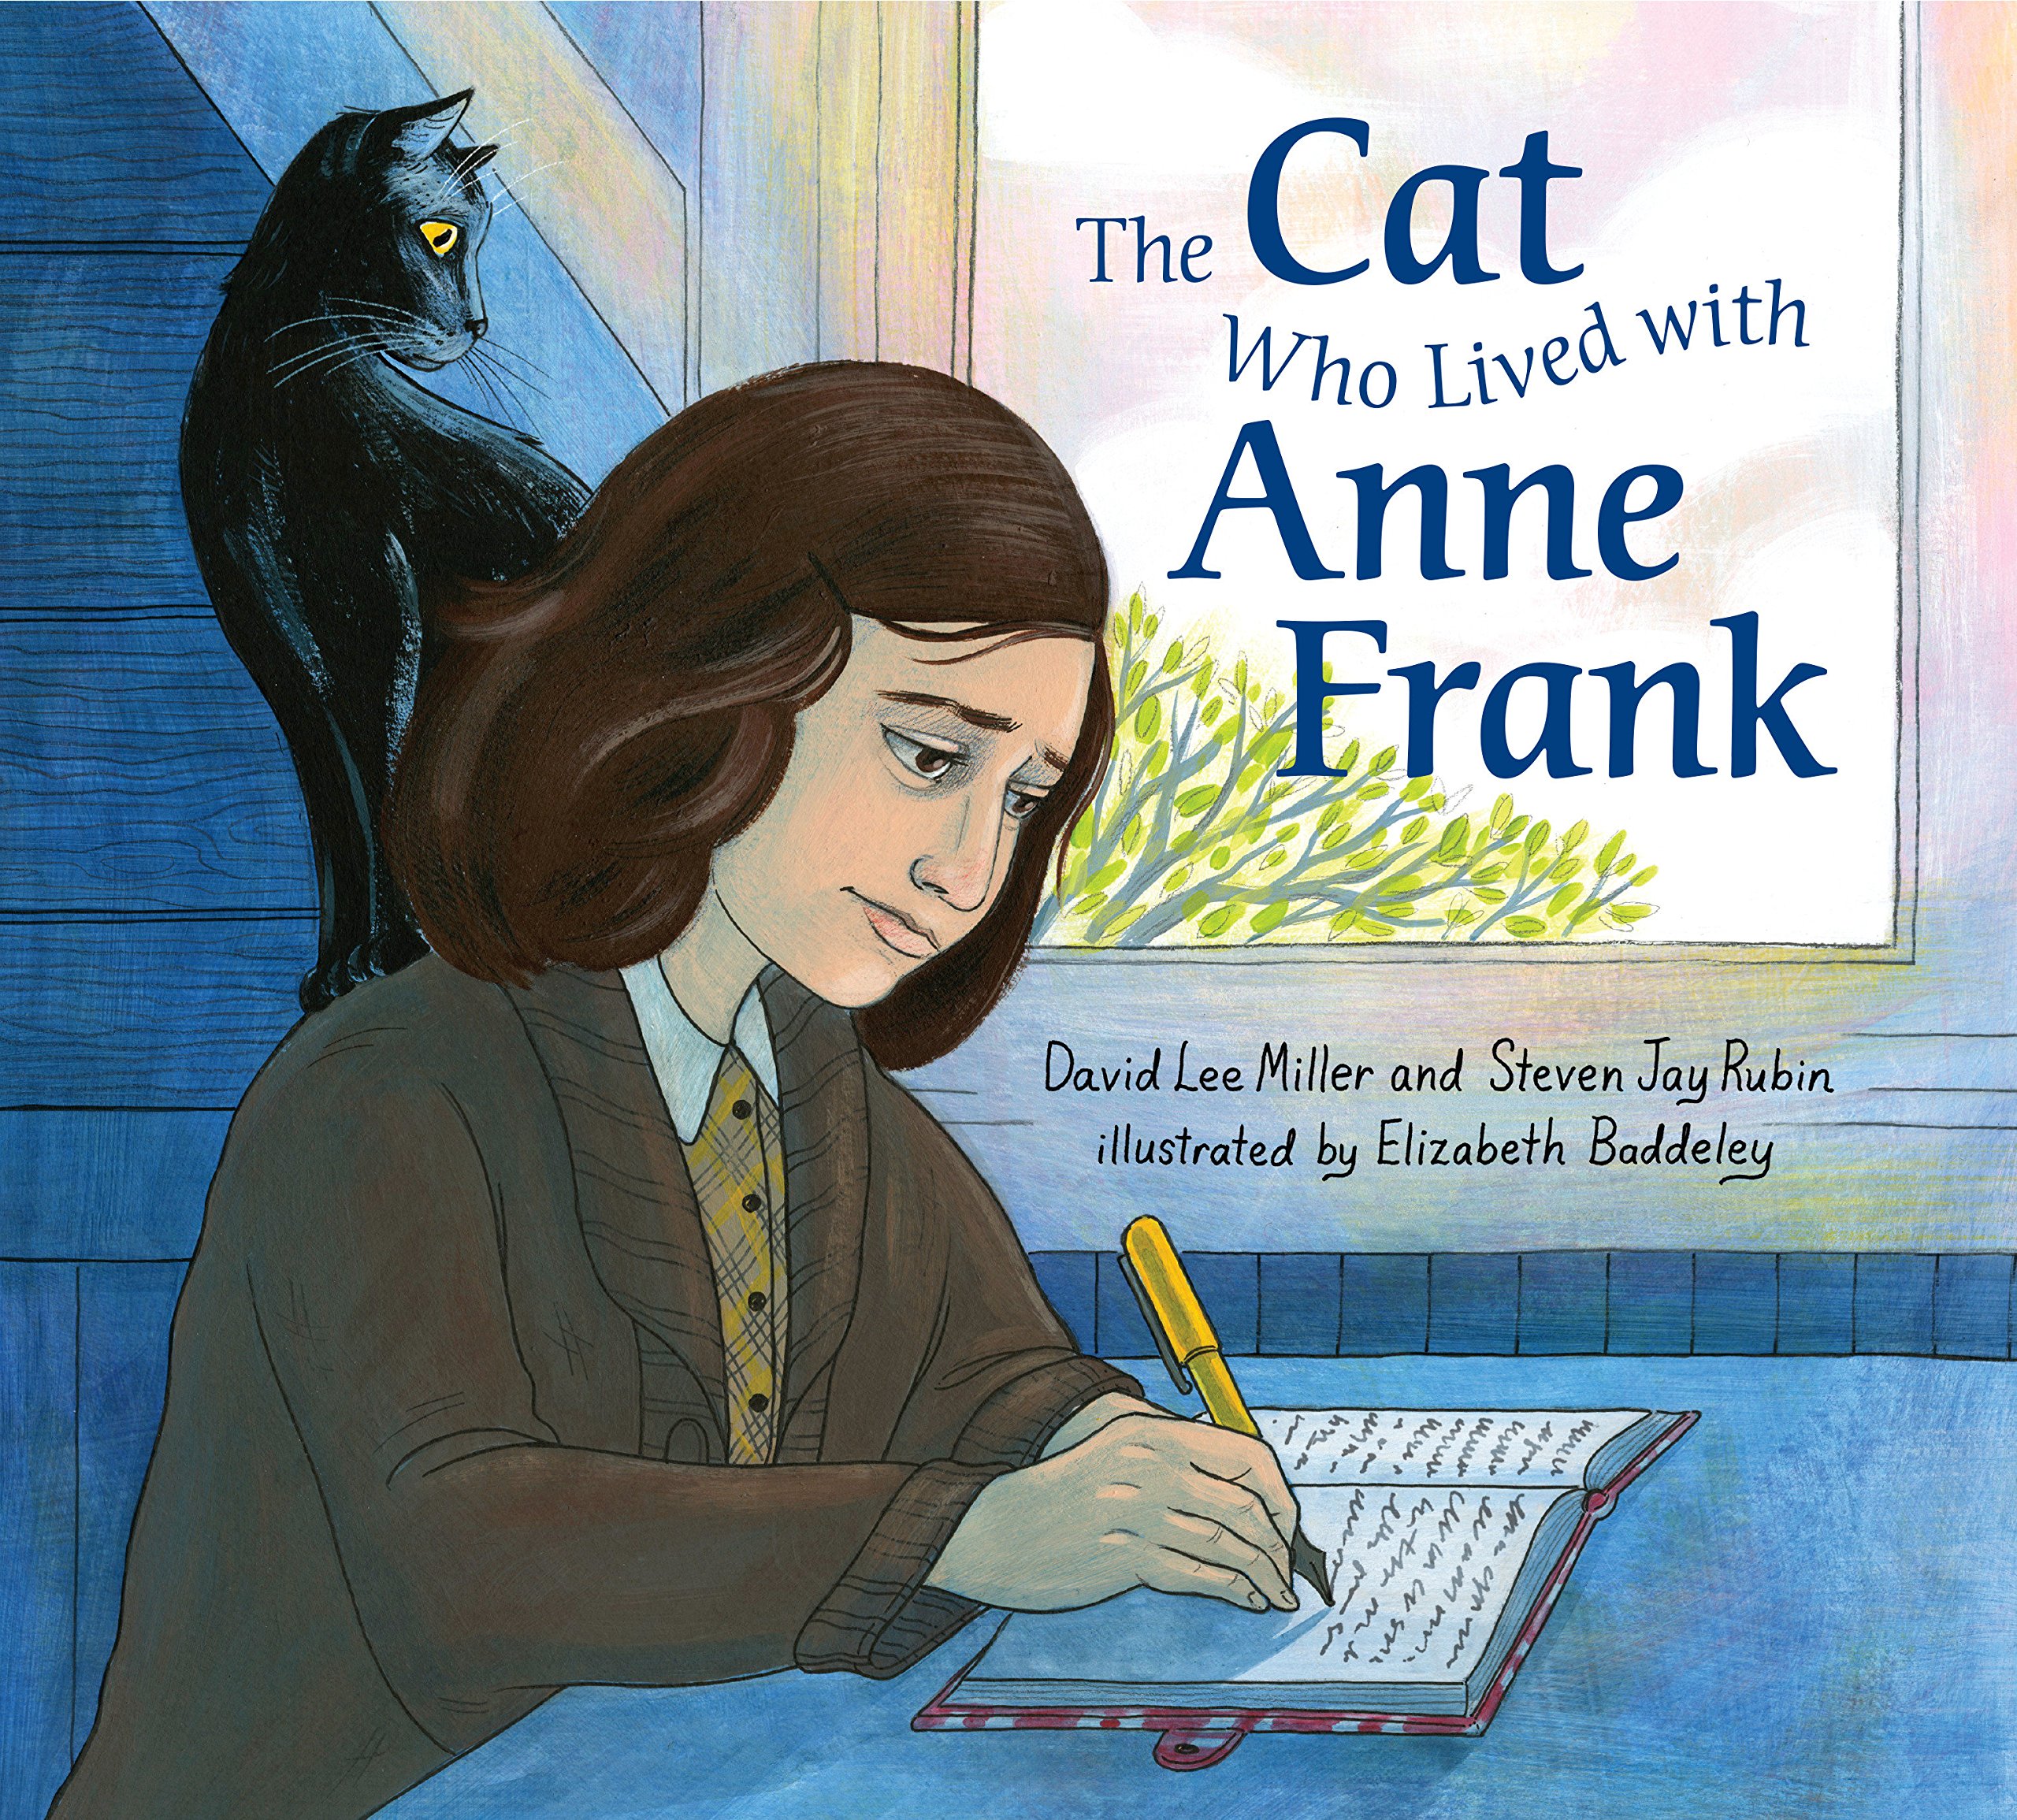 Фото - Mouschi: The Cat Who Lived with Anne Frank: 2560x2310 / 1401.99 Кб